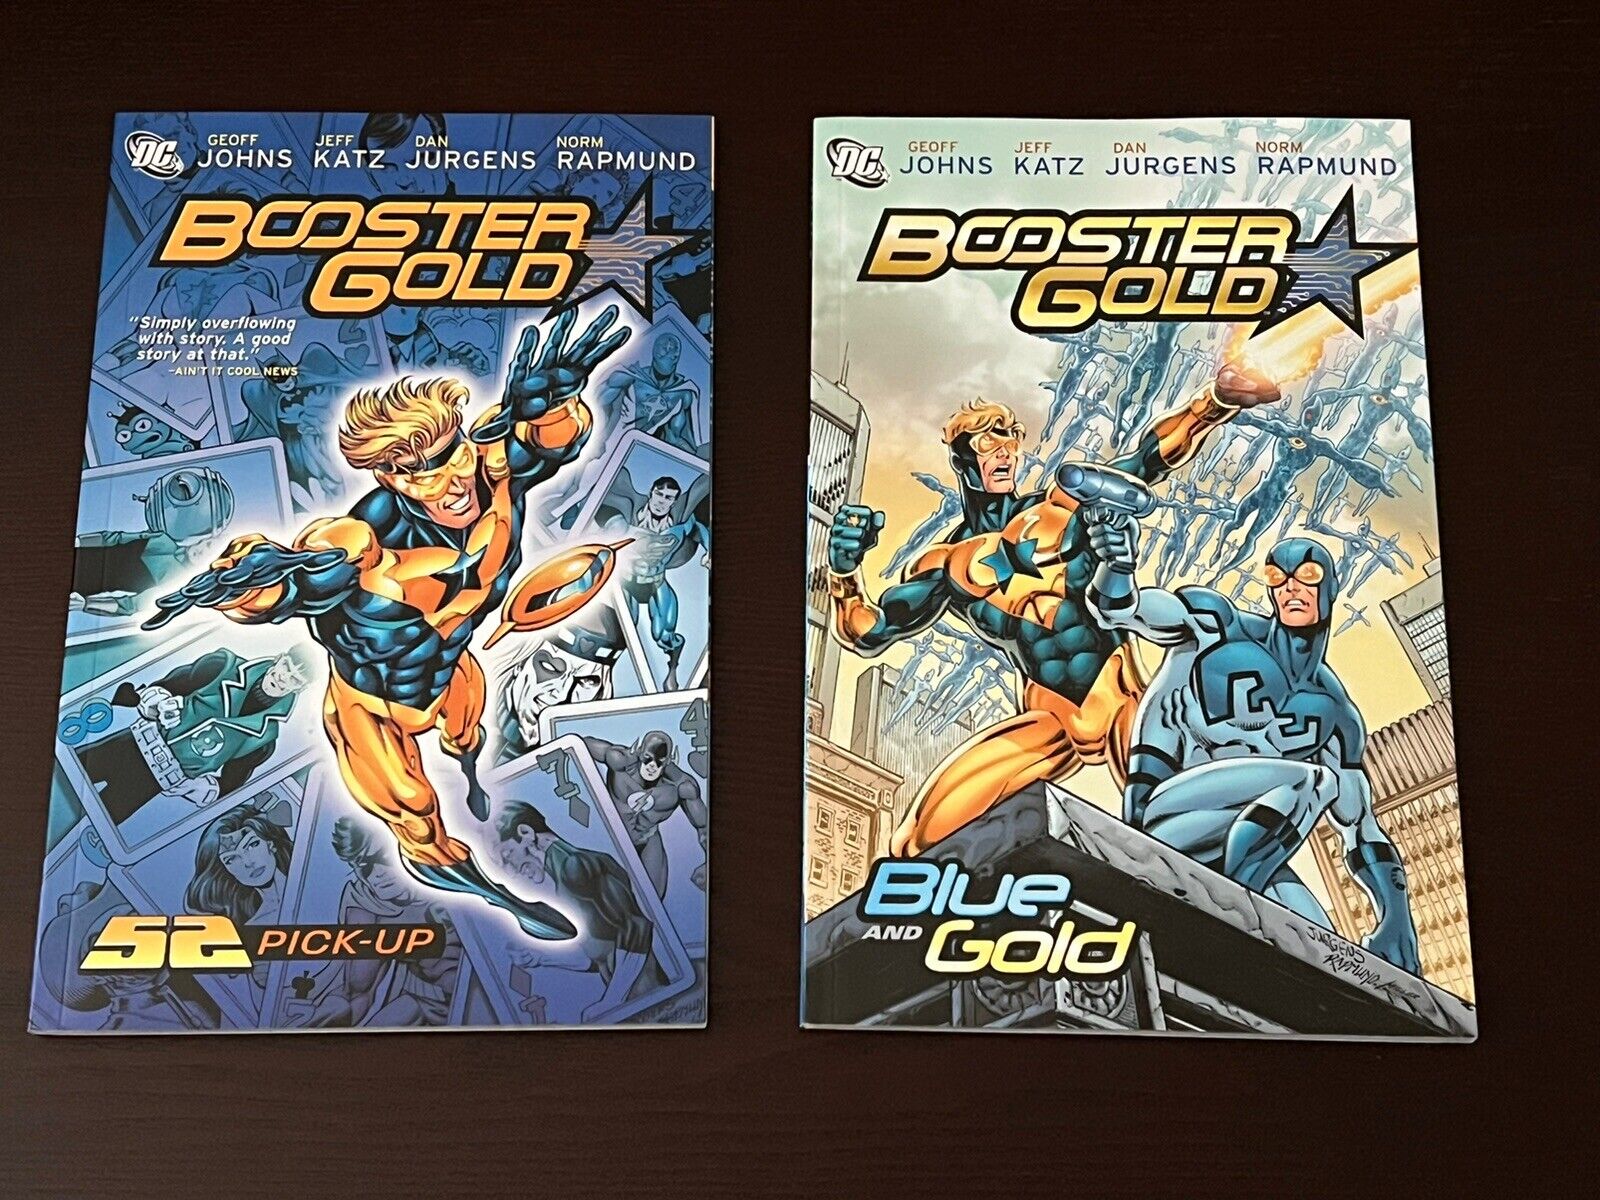 Booster Gold Vol. 1 & 2 trade Paperback DC Comics 2007 Series Blue And Gold, 52